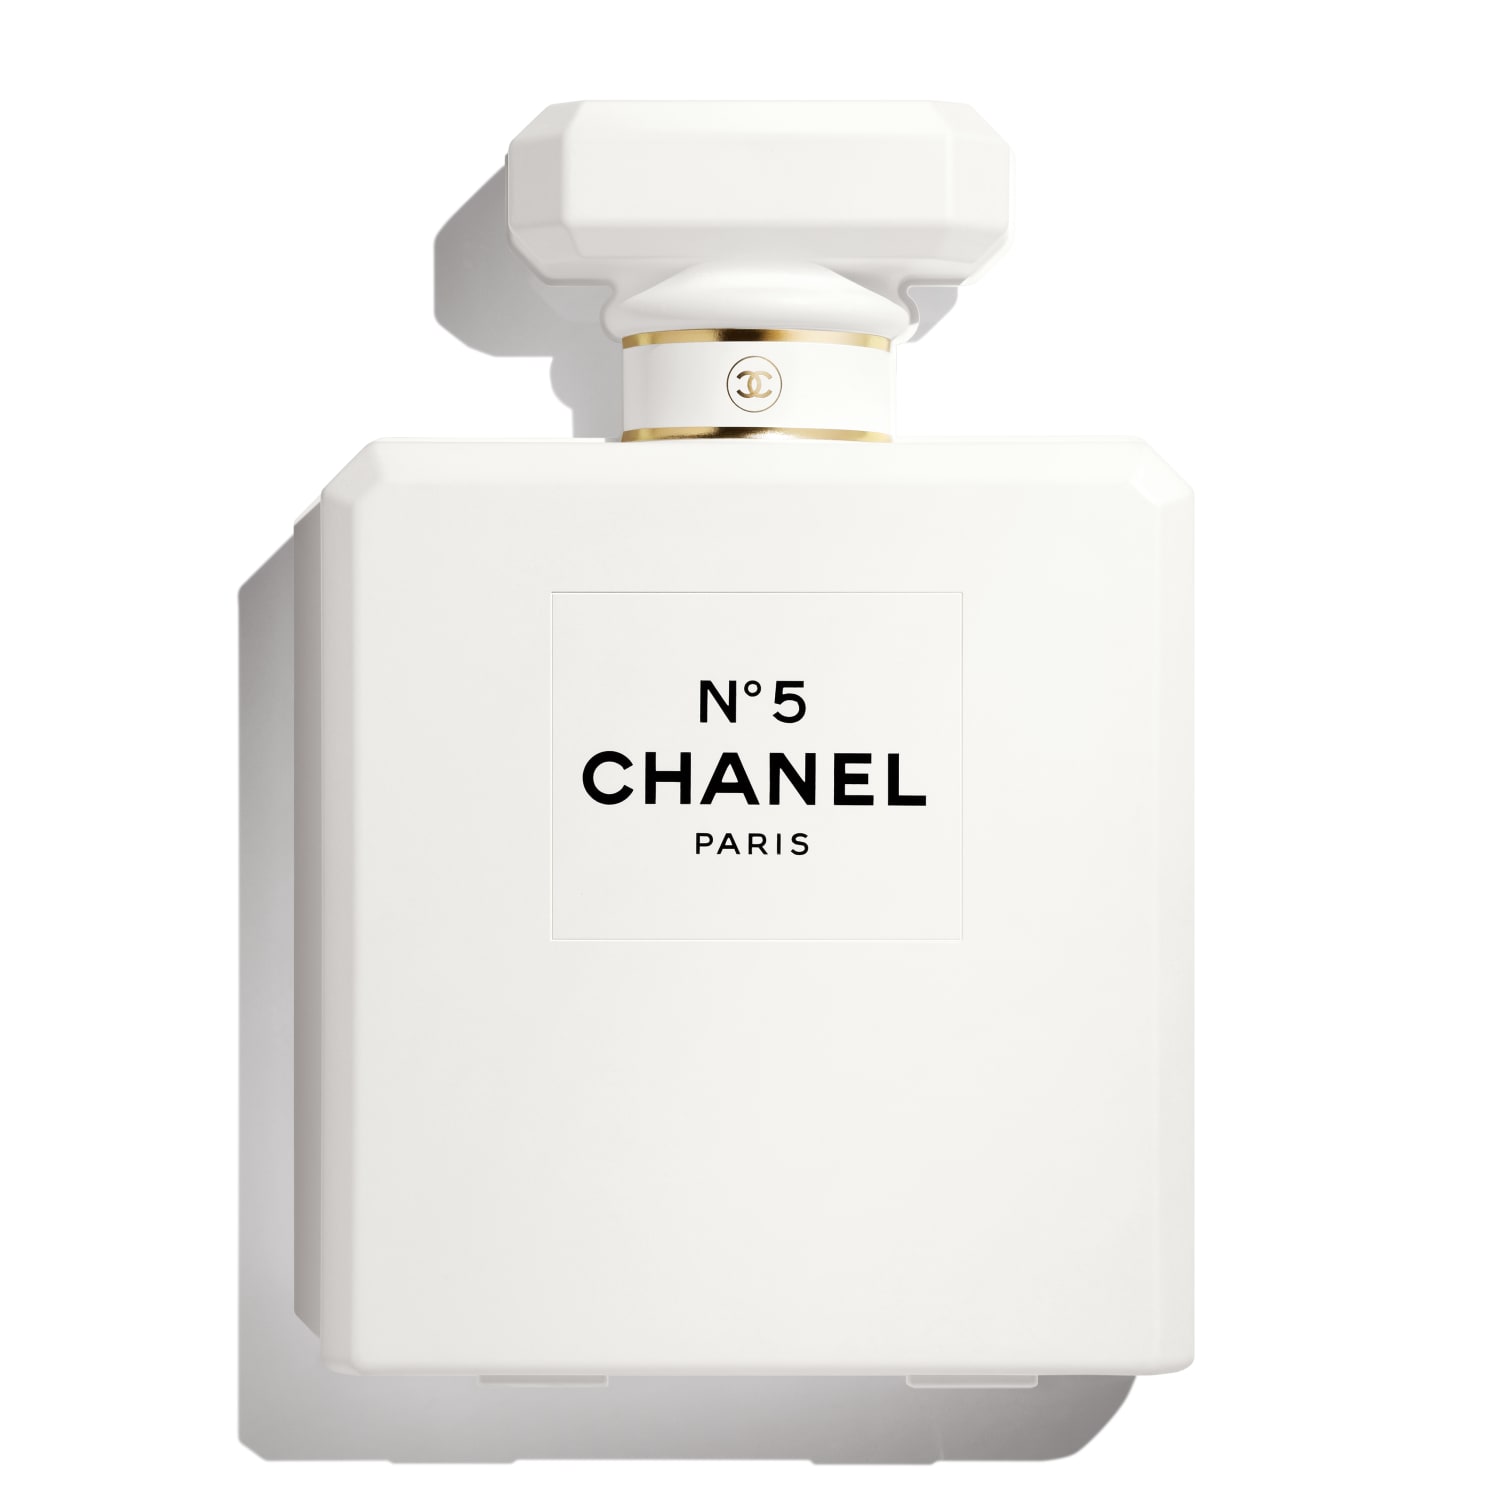 calendrier-avent-luxe-chanel-n5-2021